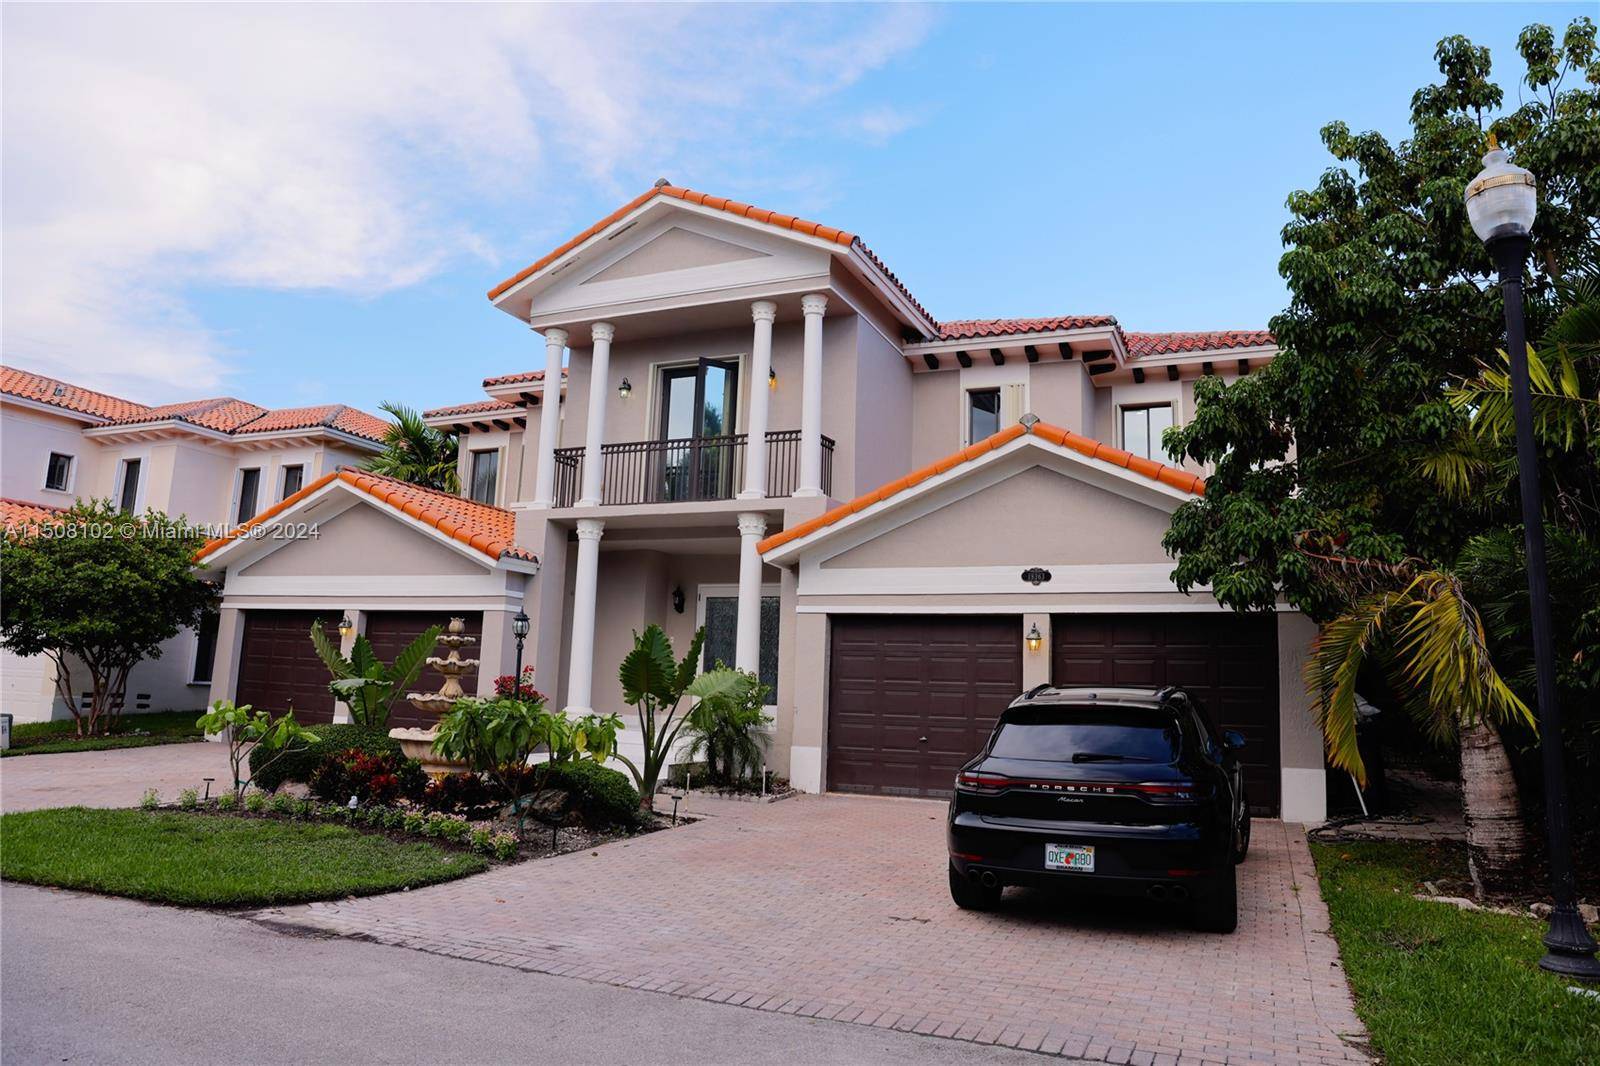 Welcome to this breathtaking, fully remodeled home in a prestigious guard gated South Miami community.